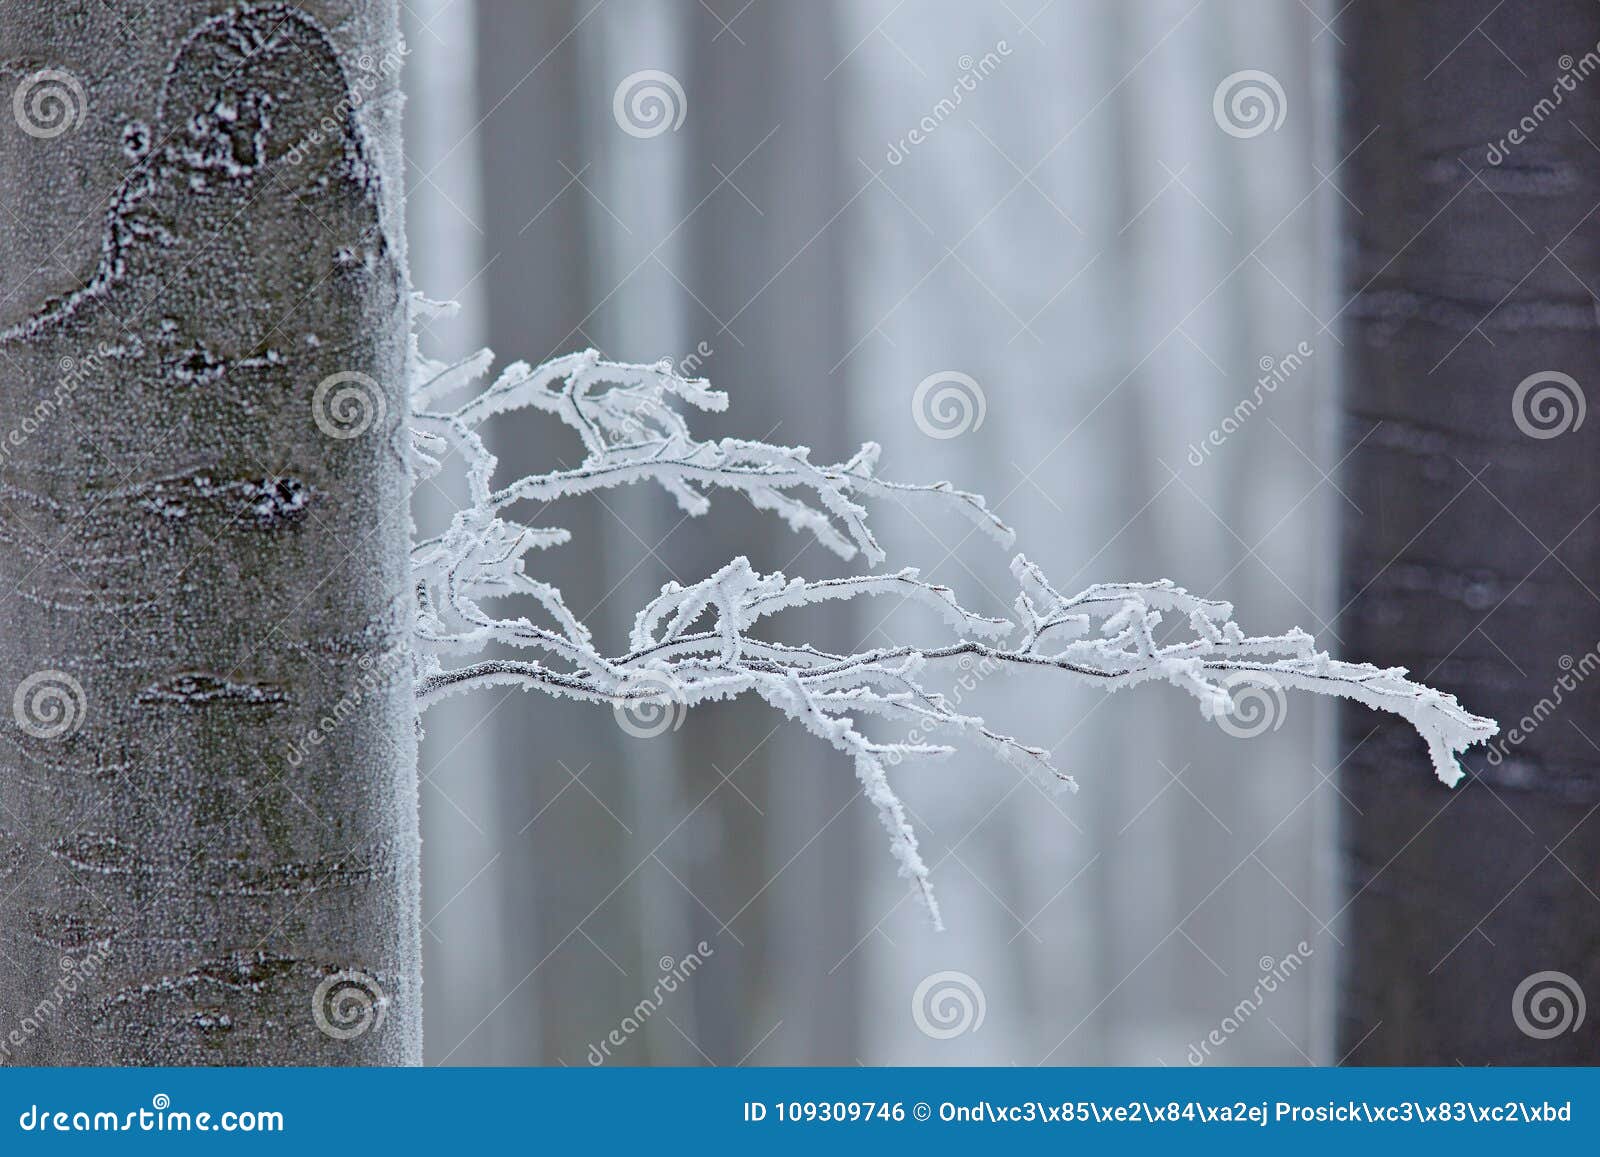 winter in forest, trees with rime. cold winter with ice on tree blanch in europe, germany. winter wood, white forest landscape. sm